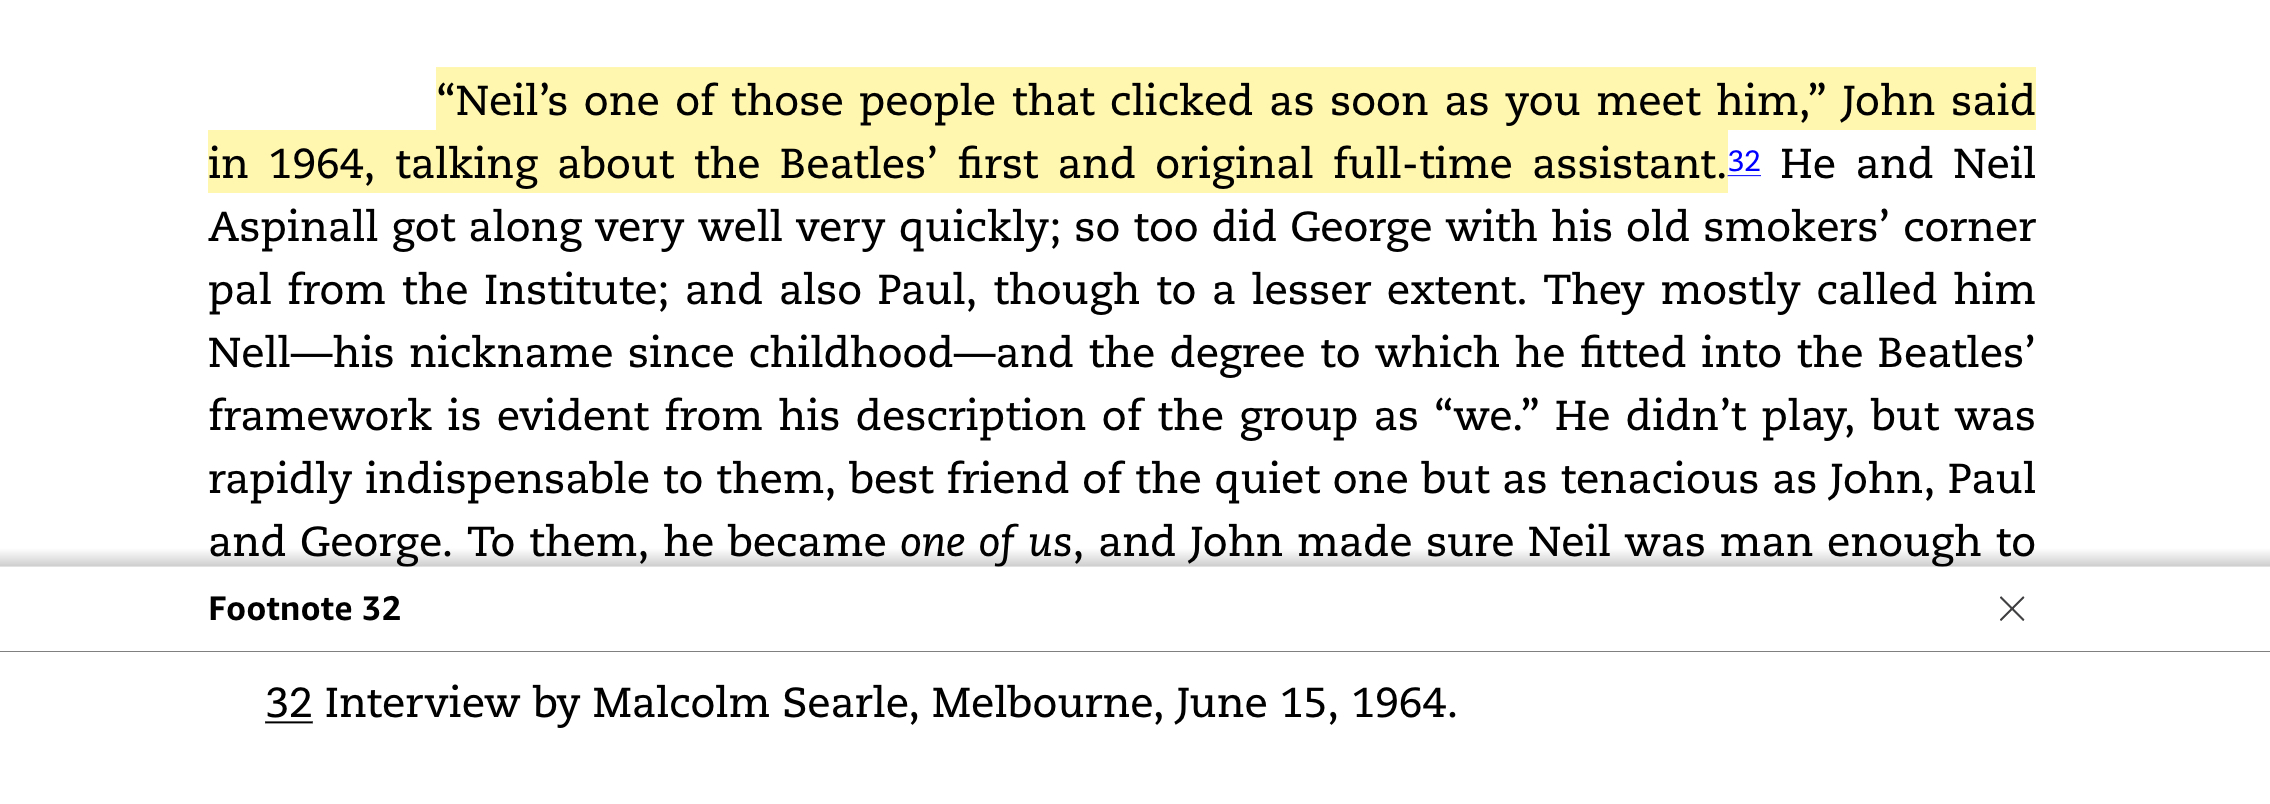 Lewisohn, Tune In, full paragraph surrounding citation 20-32. "Neil's one of those people that clicked as soon as you meet him," John said in 1964,
talking about the Beatles' first and original full-time assistant. (32) He and Neil Aspinall got along very well very quickly; so too did George with his old smokers' corner pal from the Institute; and also Paul, though to a lesser extent. They mostly called him Nell-his nickname since childhood-and the degree to which he fitted into the Beatles' framework is evident from his description of the group as "we." He didn't play, but was rapidly indispensable to them, best friend of the quiet one but as tenacious as John, Paul and George. To them, he became one of us, and John made sure Neil was man enough to stand up to him. He wasn't just their driver and he wasn't only their roadie, he was their mate and their protector. They shared plenty of characteristics-they were sharp, blunt, mentally strong, bright, funny, opinionated, mouthy, loyal, honest and addicted to nicotine. They paid him about £7 a week to begin with, shared between the four.